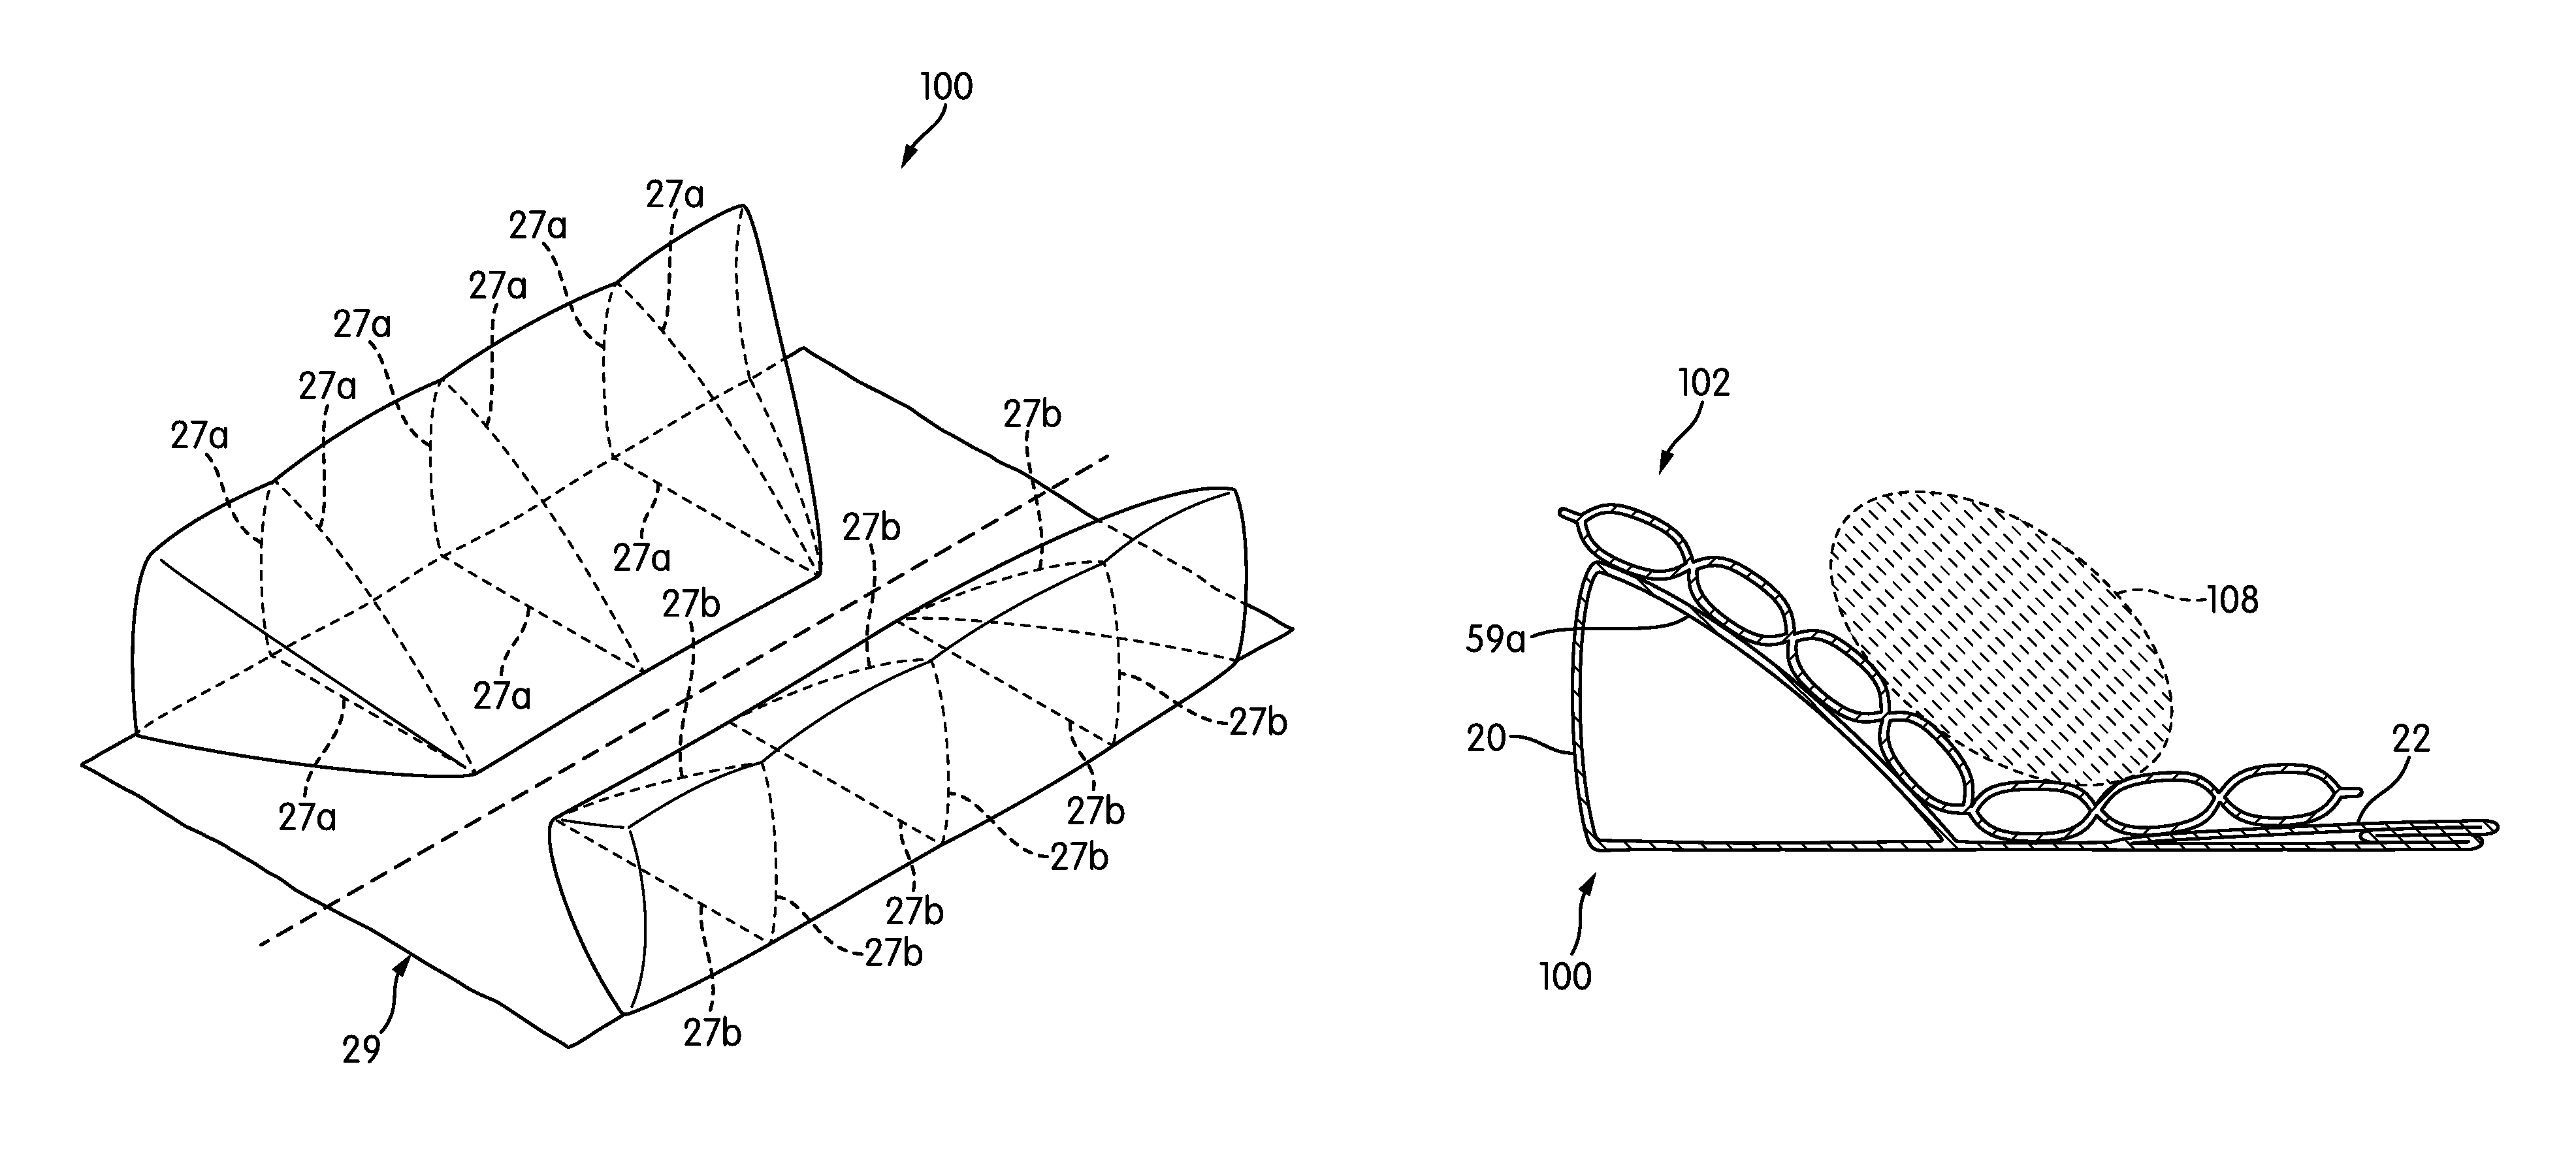 Patient turning and positioning system device